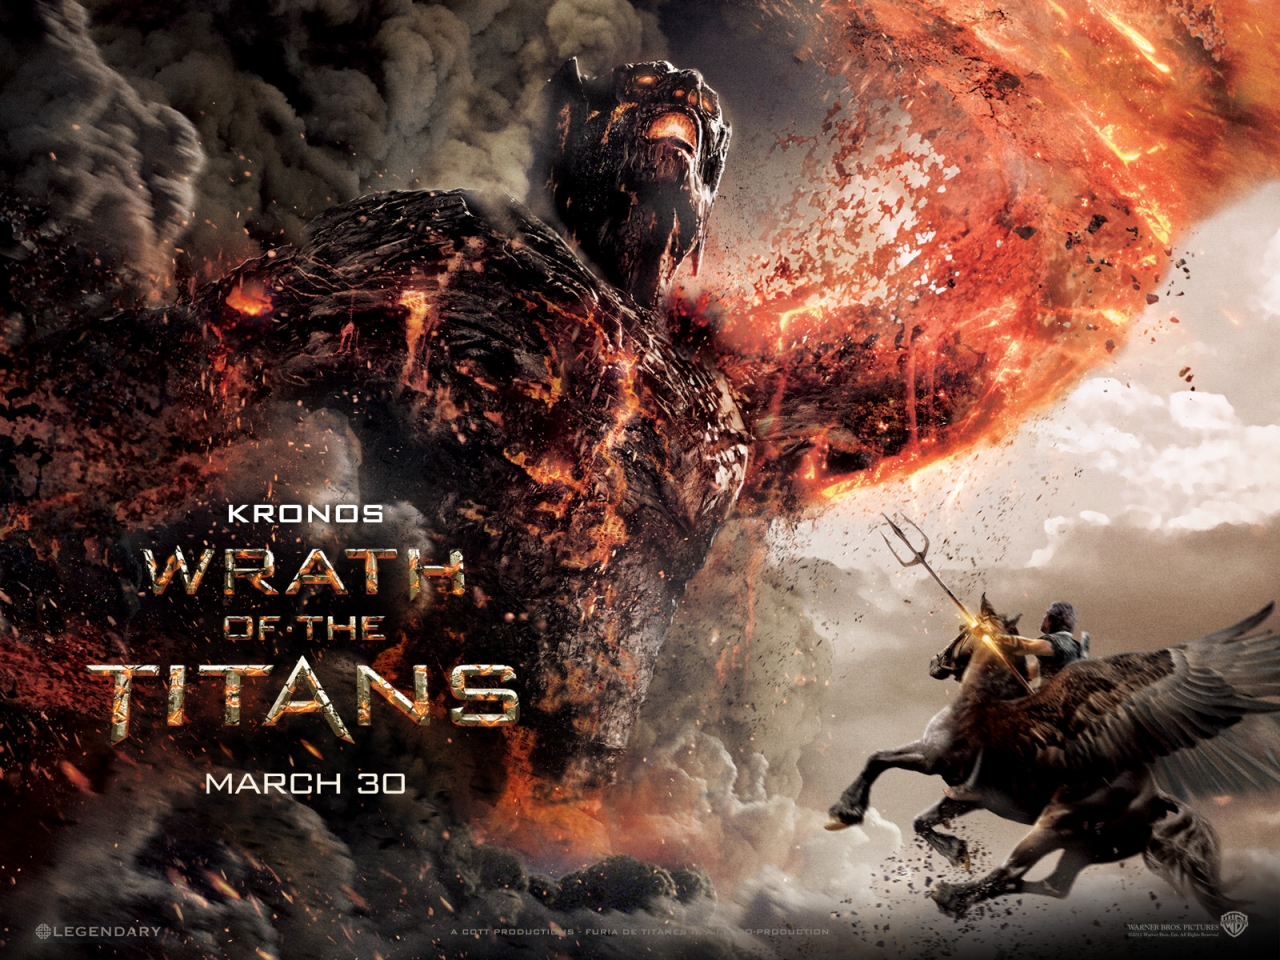 Kronos Wrath of the Titans for 1280 x 960 resolution